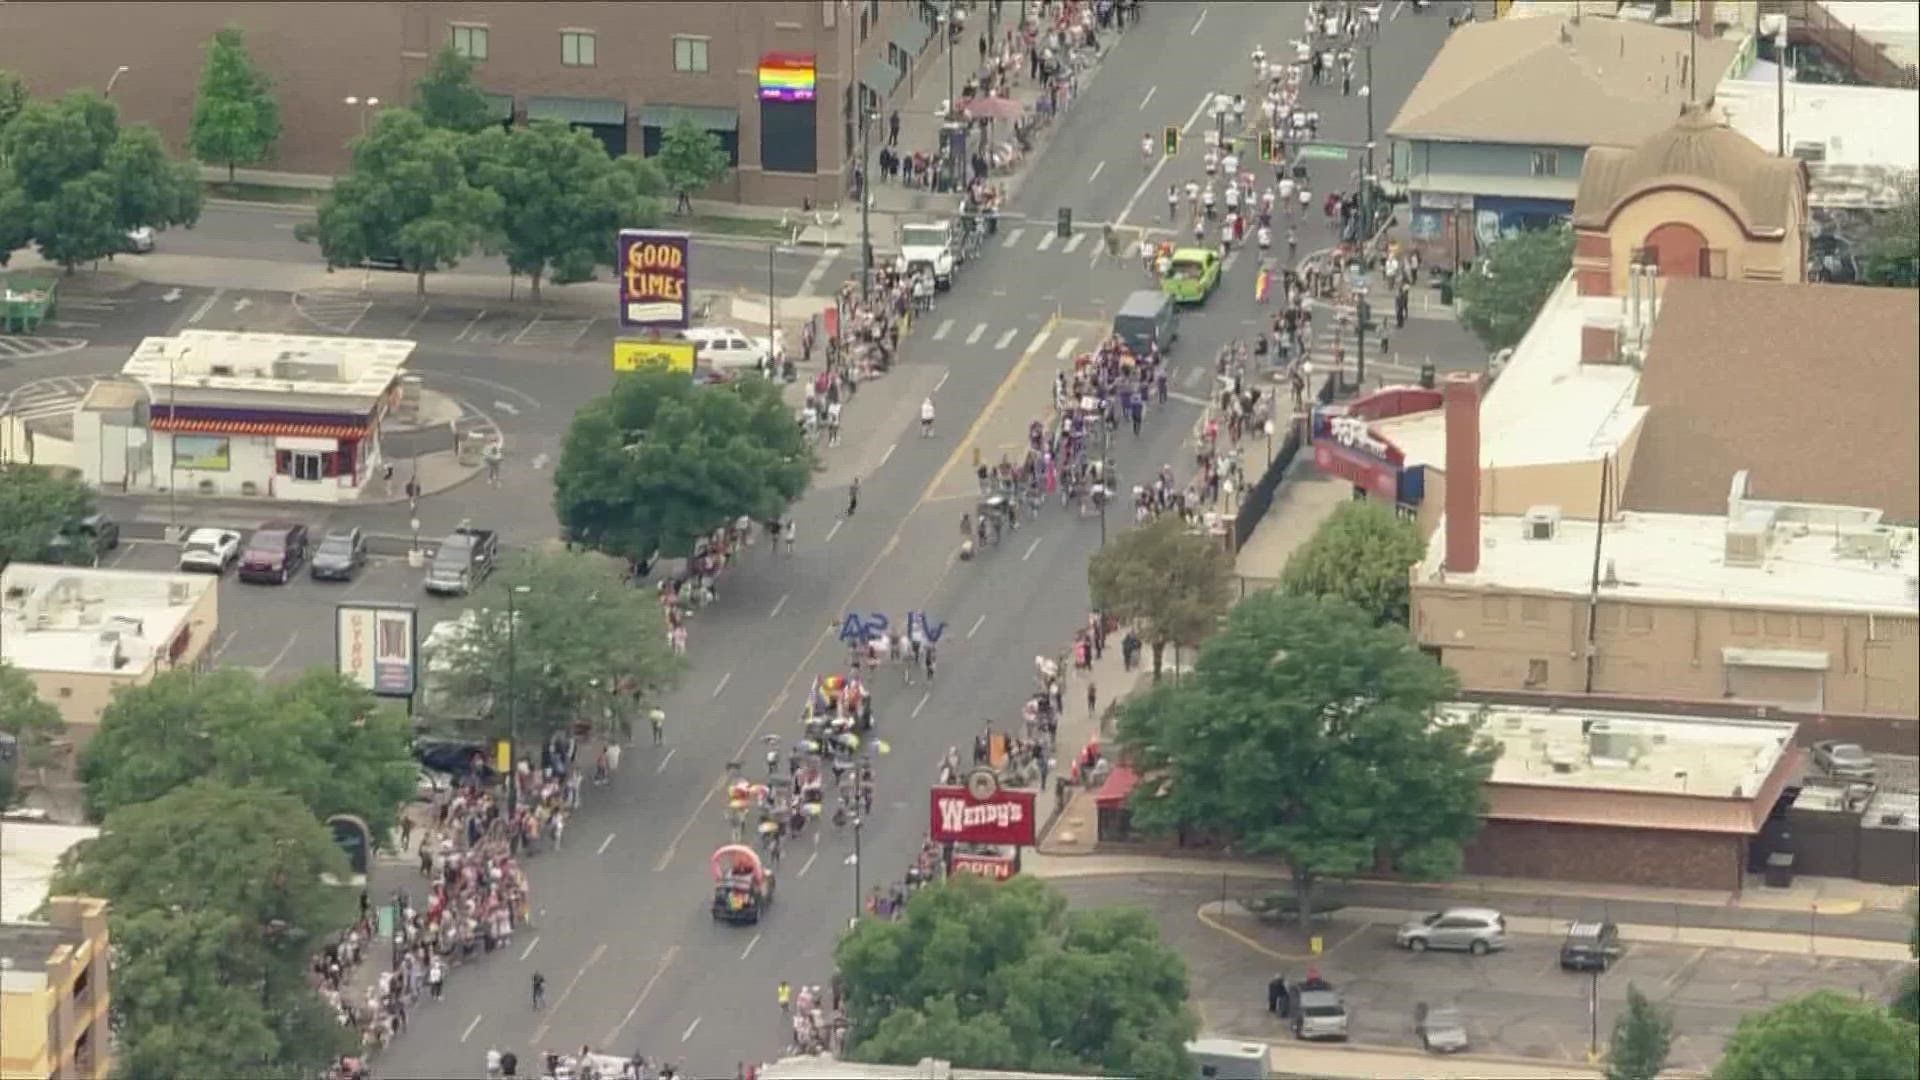 More than 100,000 lined the streets of downtown Denver to cheer on colorful floats, marchers and musicians for Denver Pride on Sunday morning.